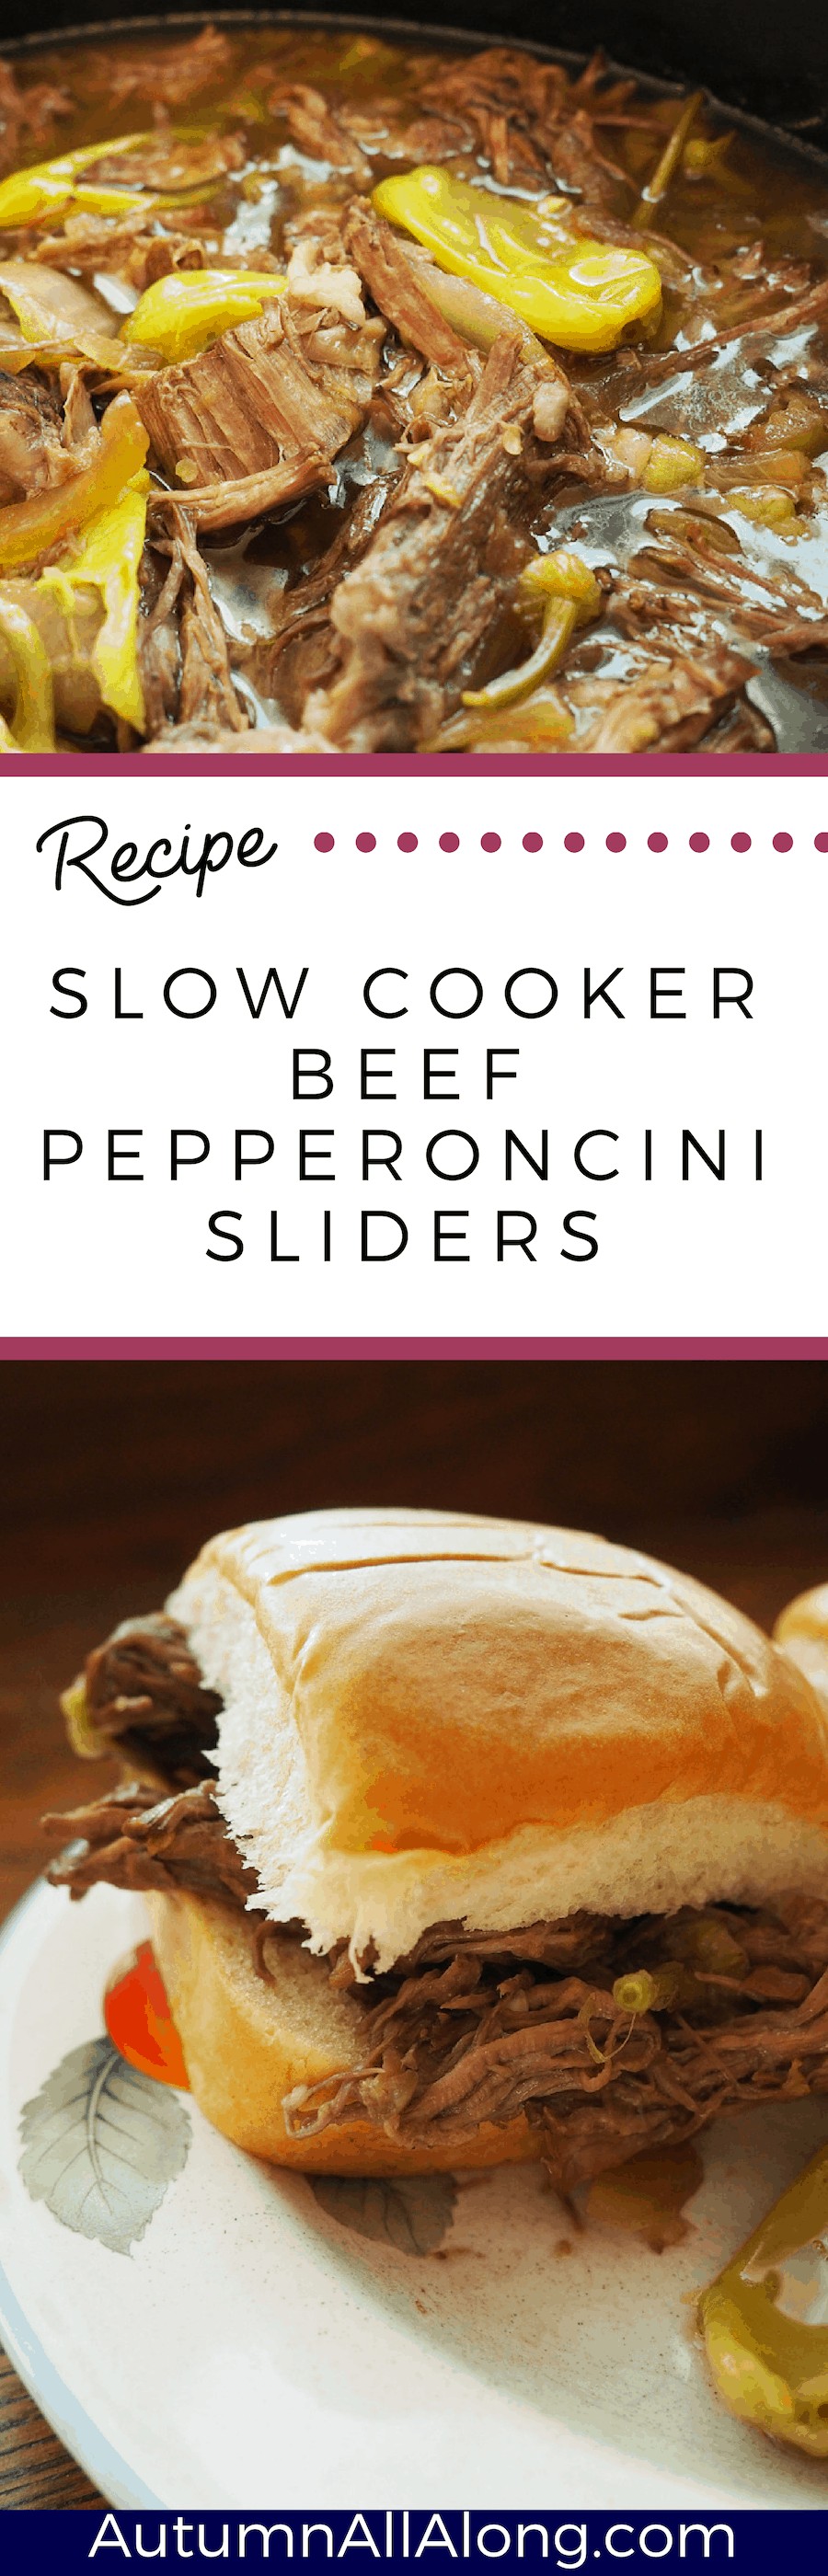 slow cooker beef pepperoncini sliders: I put this on before I went to bed and my house smelled wonderful when I woke up!! I shredded the meat to put them on sliders. This was a childhood favorite and a big hit with my family! | via Autumn All Along